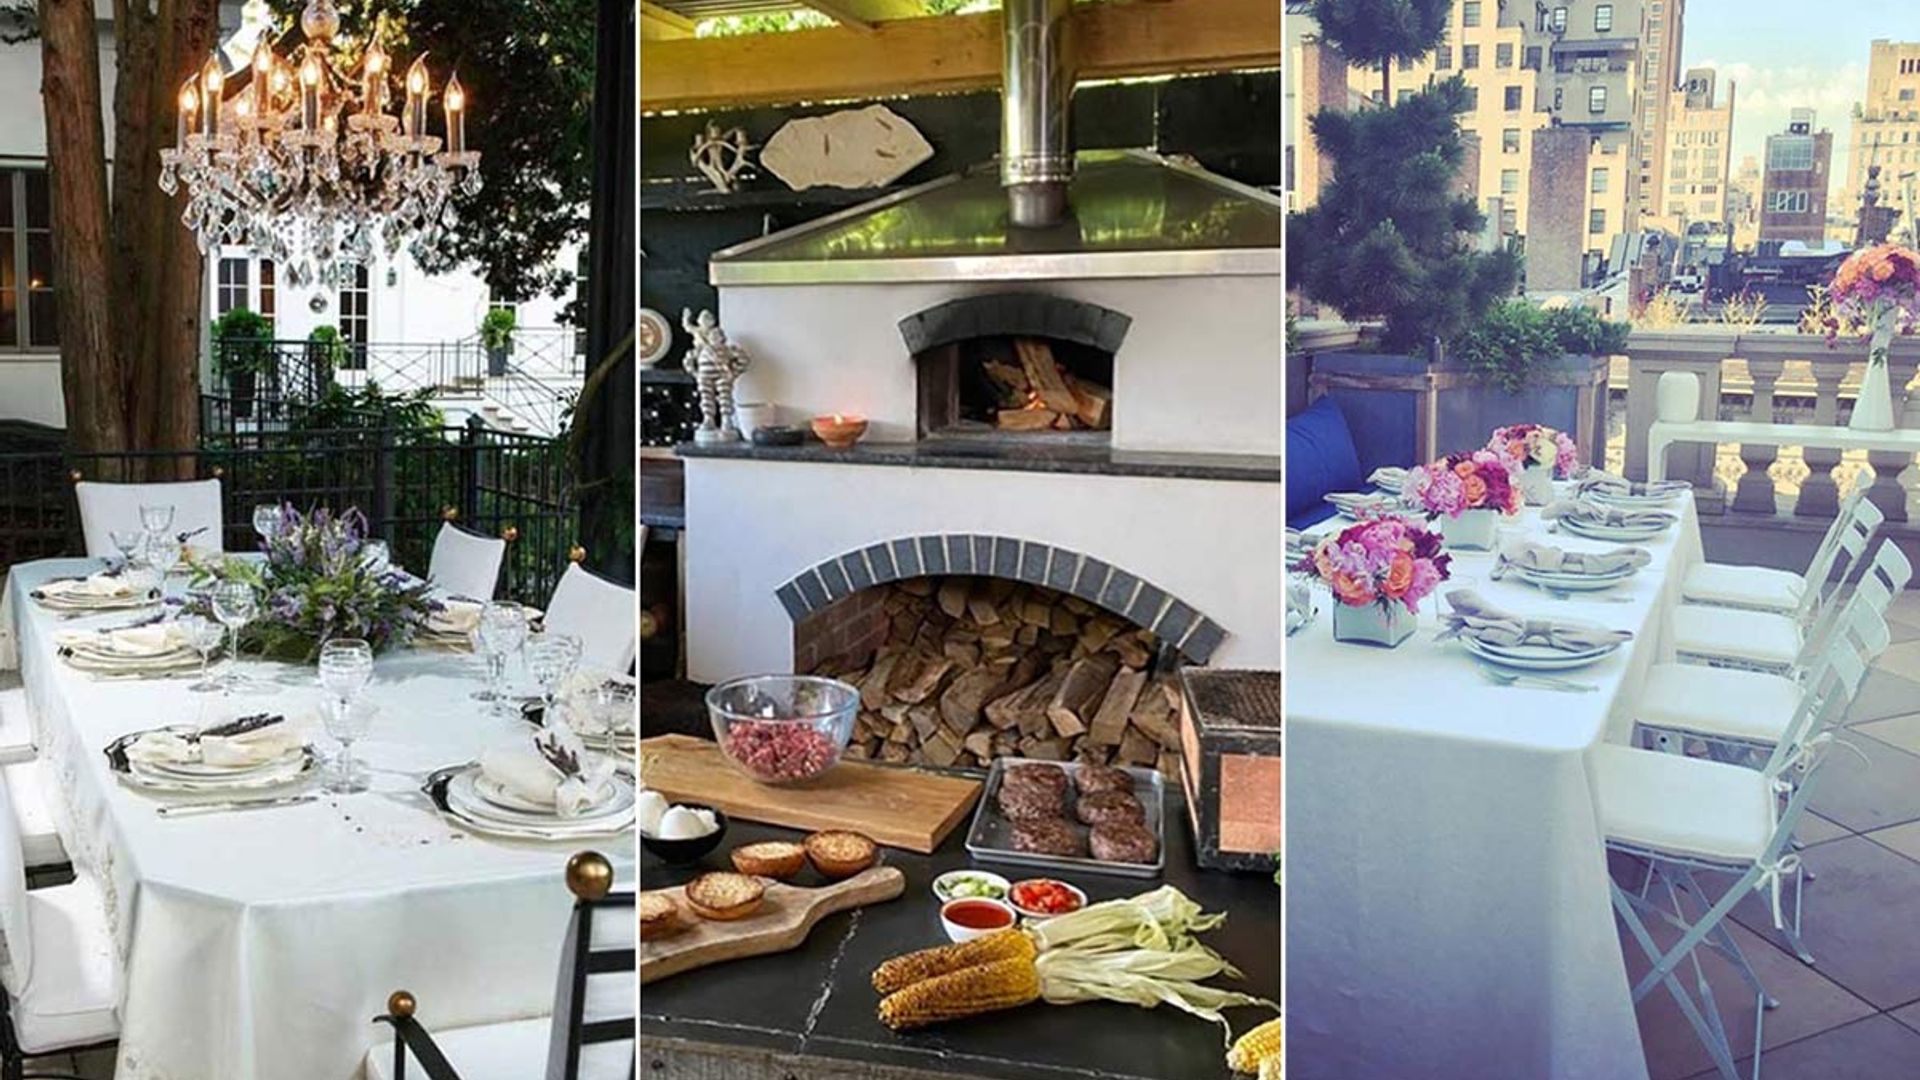 15 celebrity outdoor kitchens and dining areas perfect for the heatwave